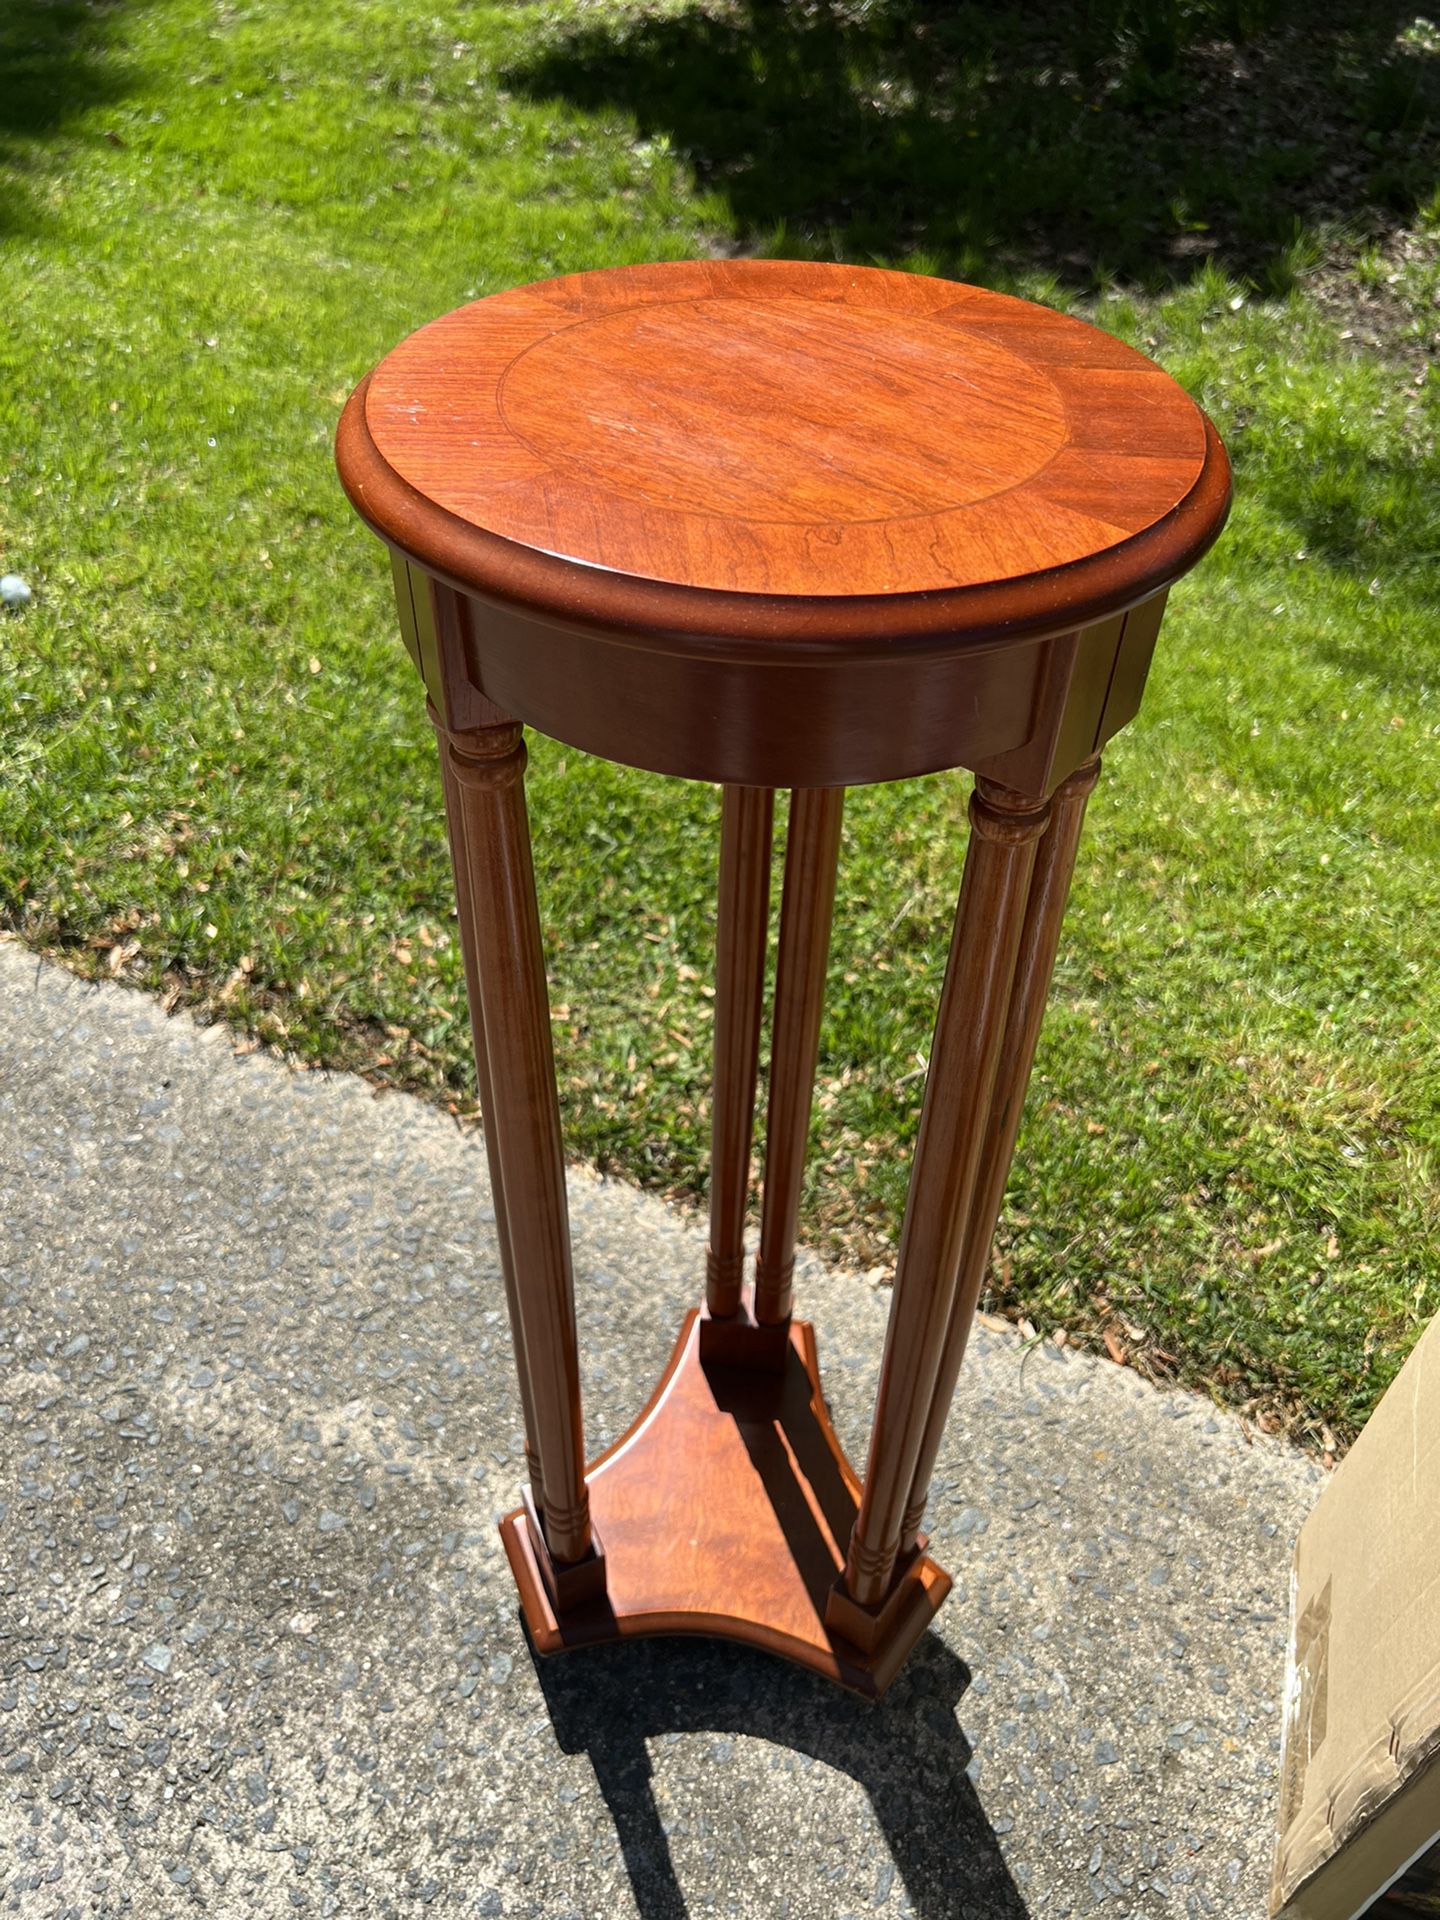 2 Wood Plant Stands